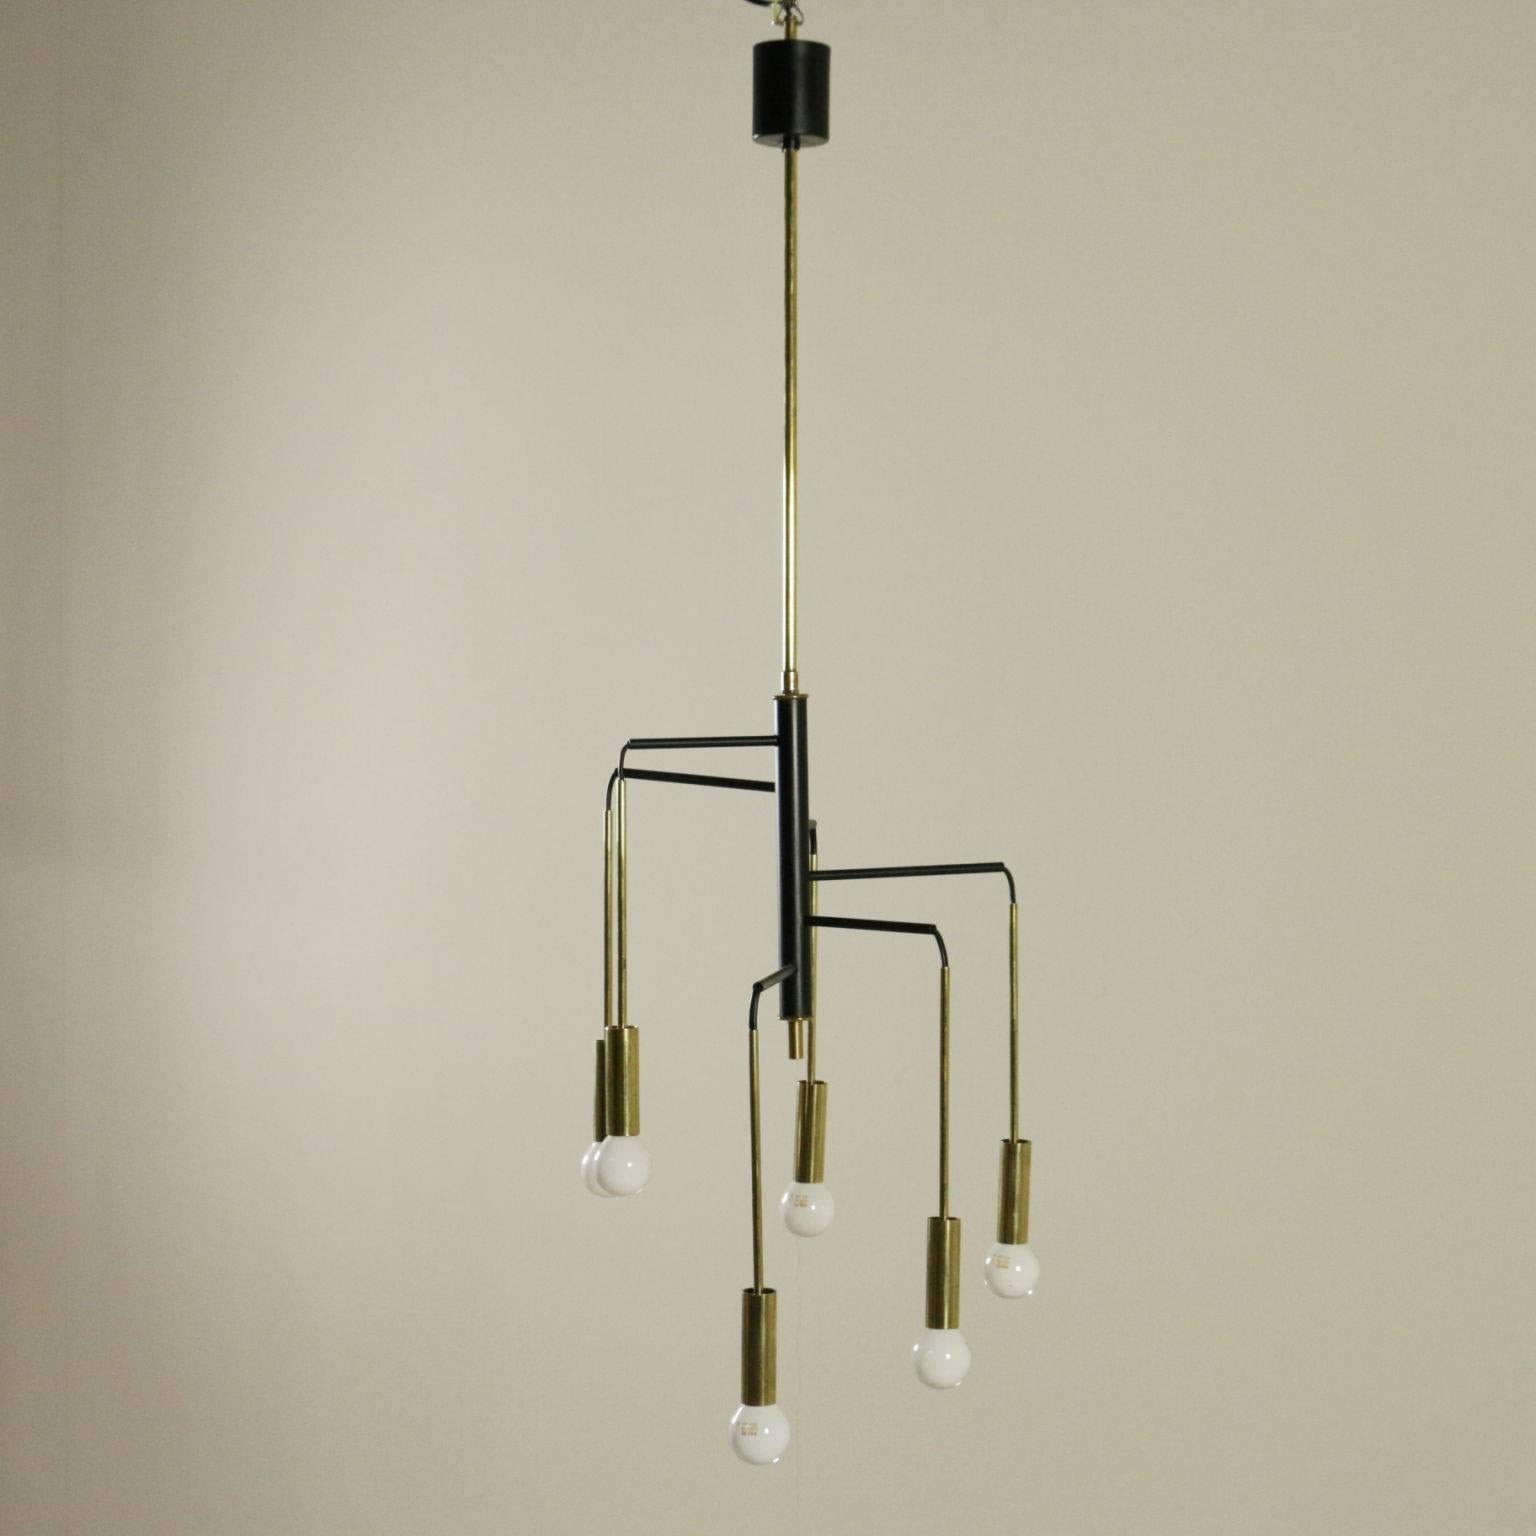 Mid-Century Modern Ceiling Lamp Brass and Laquered Aluminium Vintage, Italy 1950s-1960s